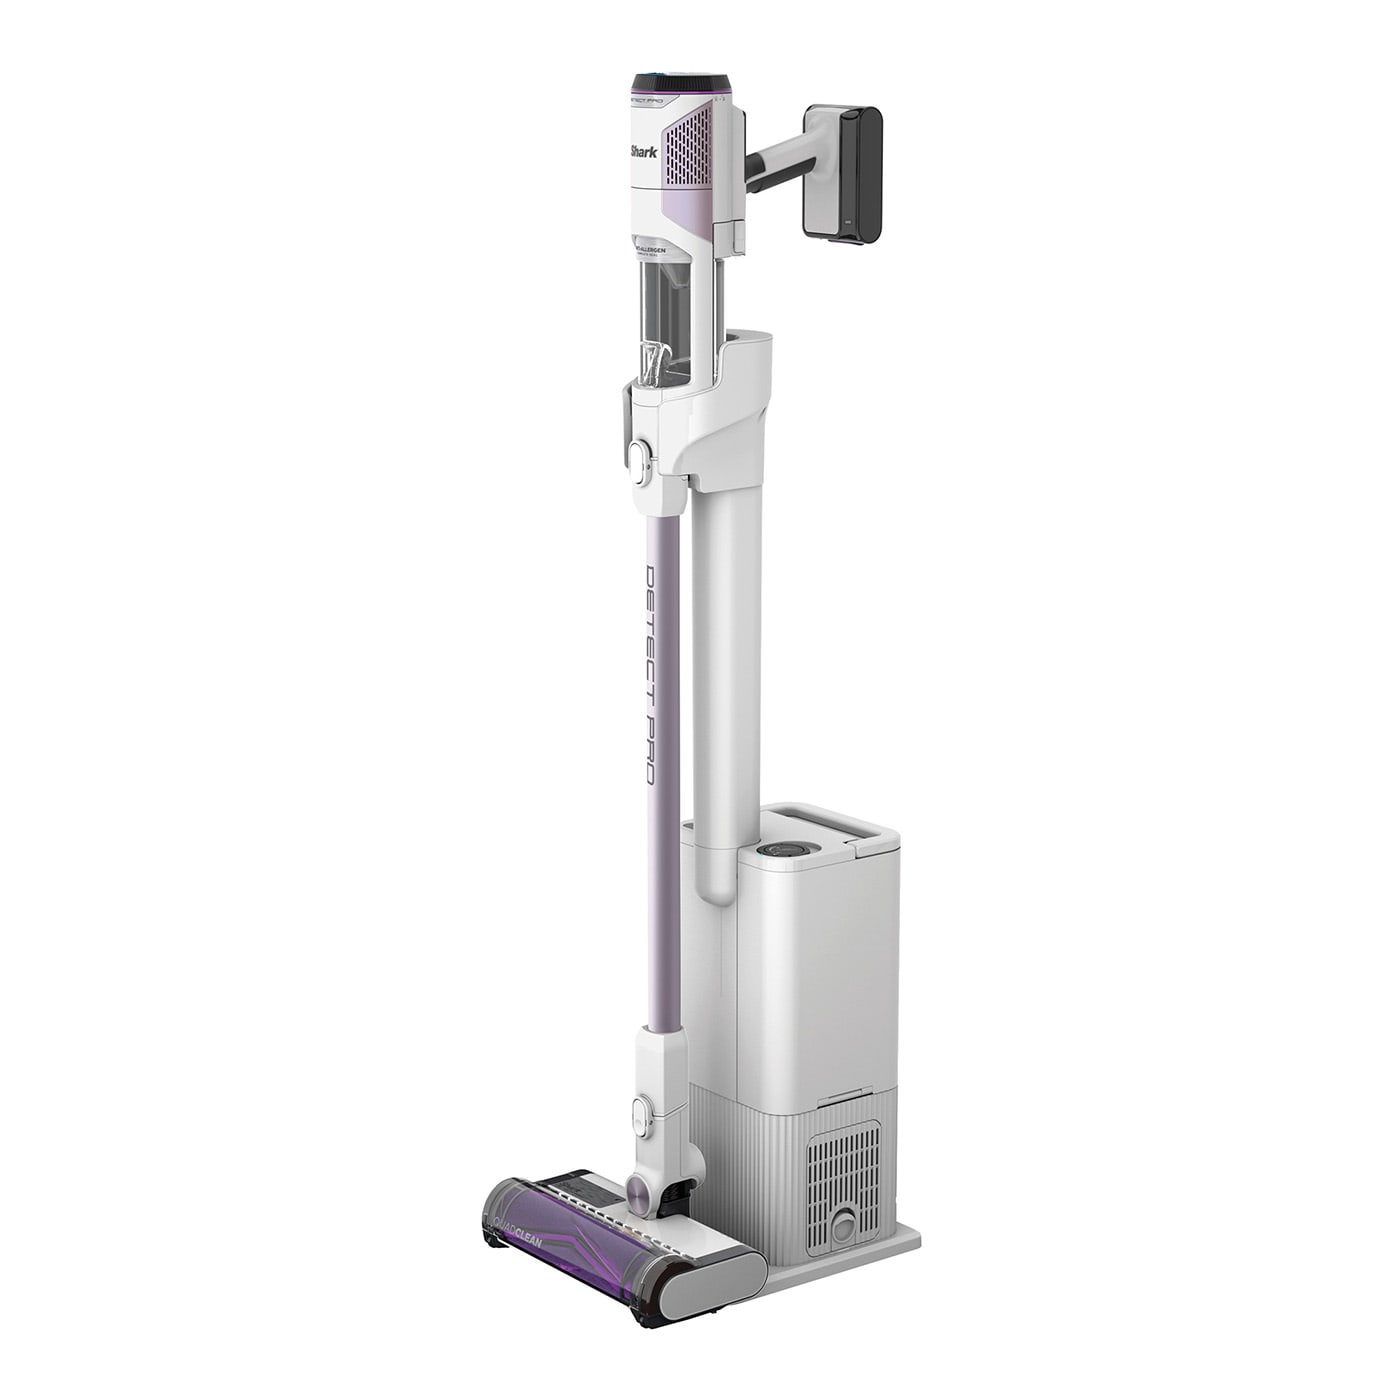 Shark Detect Pro 1.3L Cordless Vacuum Cleaner - White & Ash Purple | IW3510UK from Shark - DID Electrical